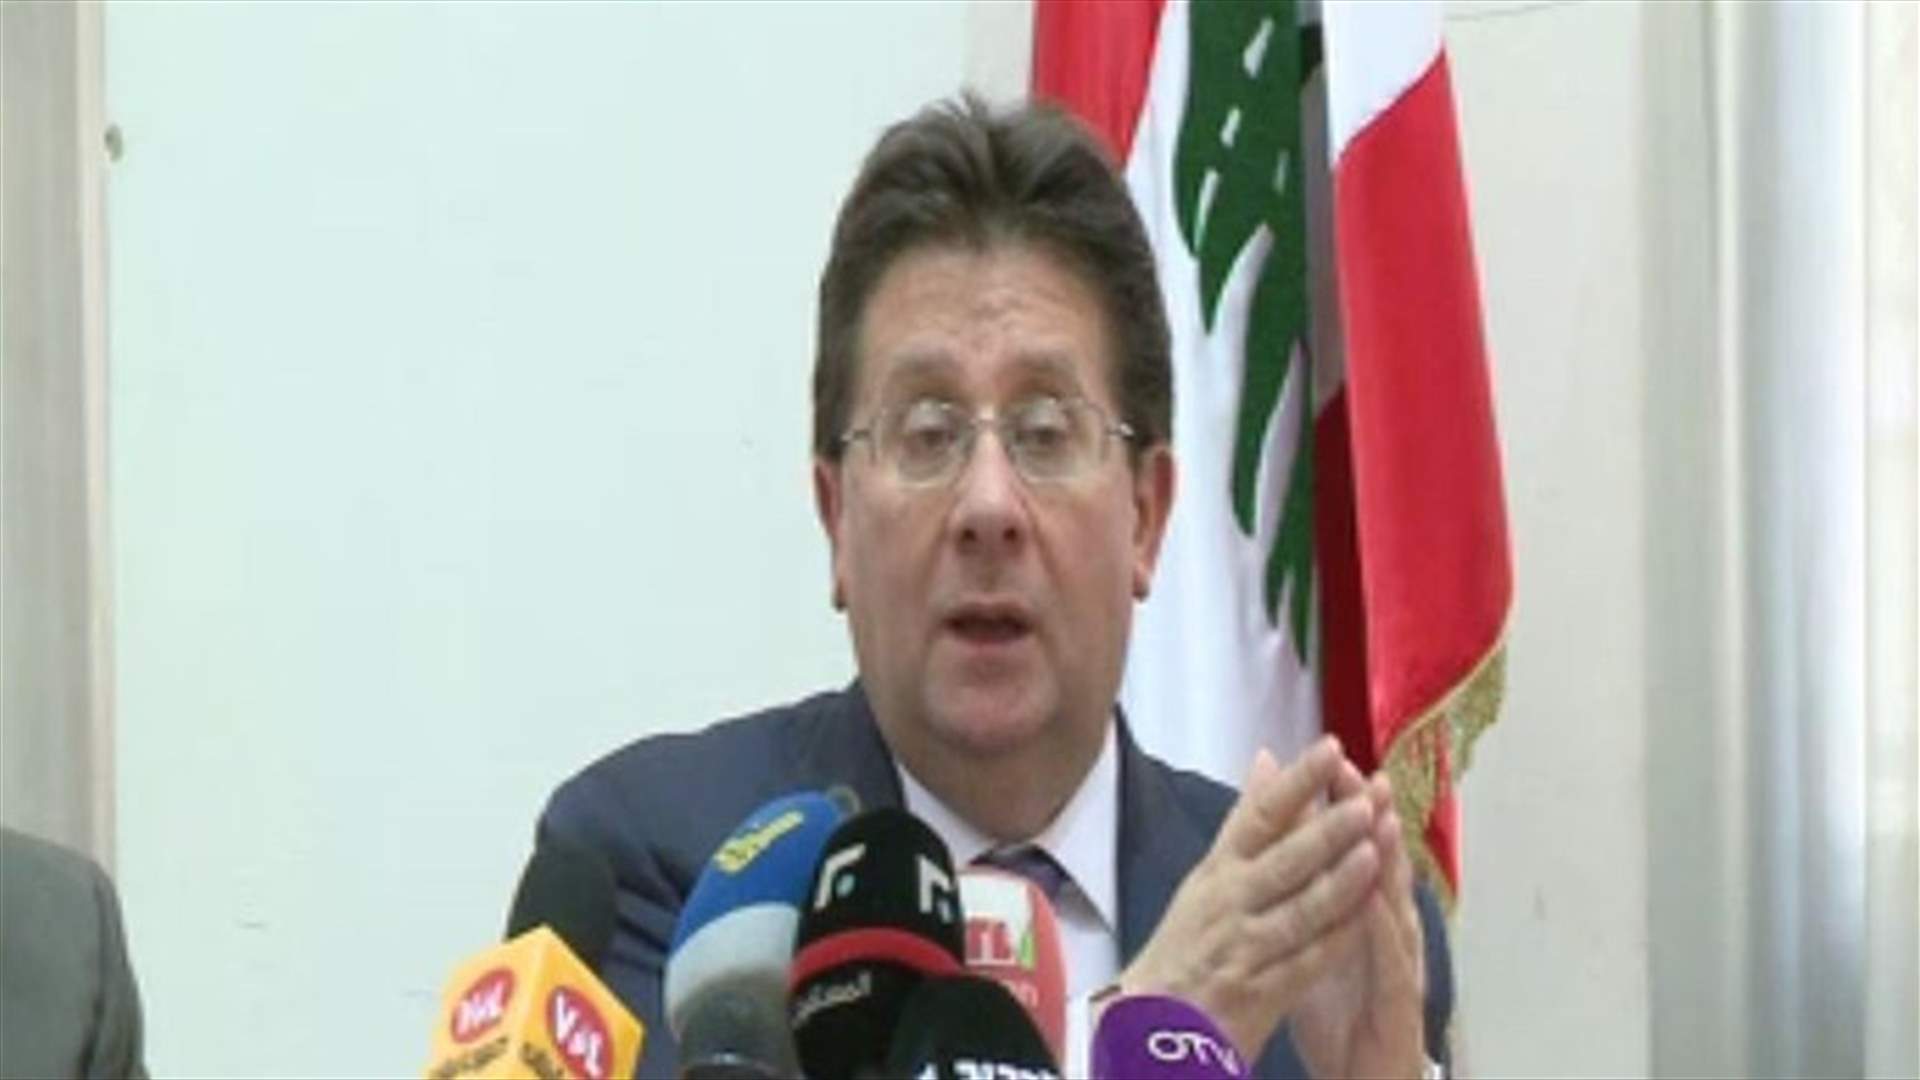 Kanaan says 5473 persons were hired in public sector after August 21, 2017